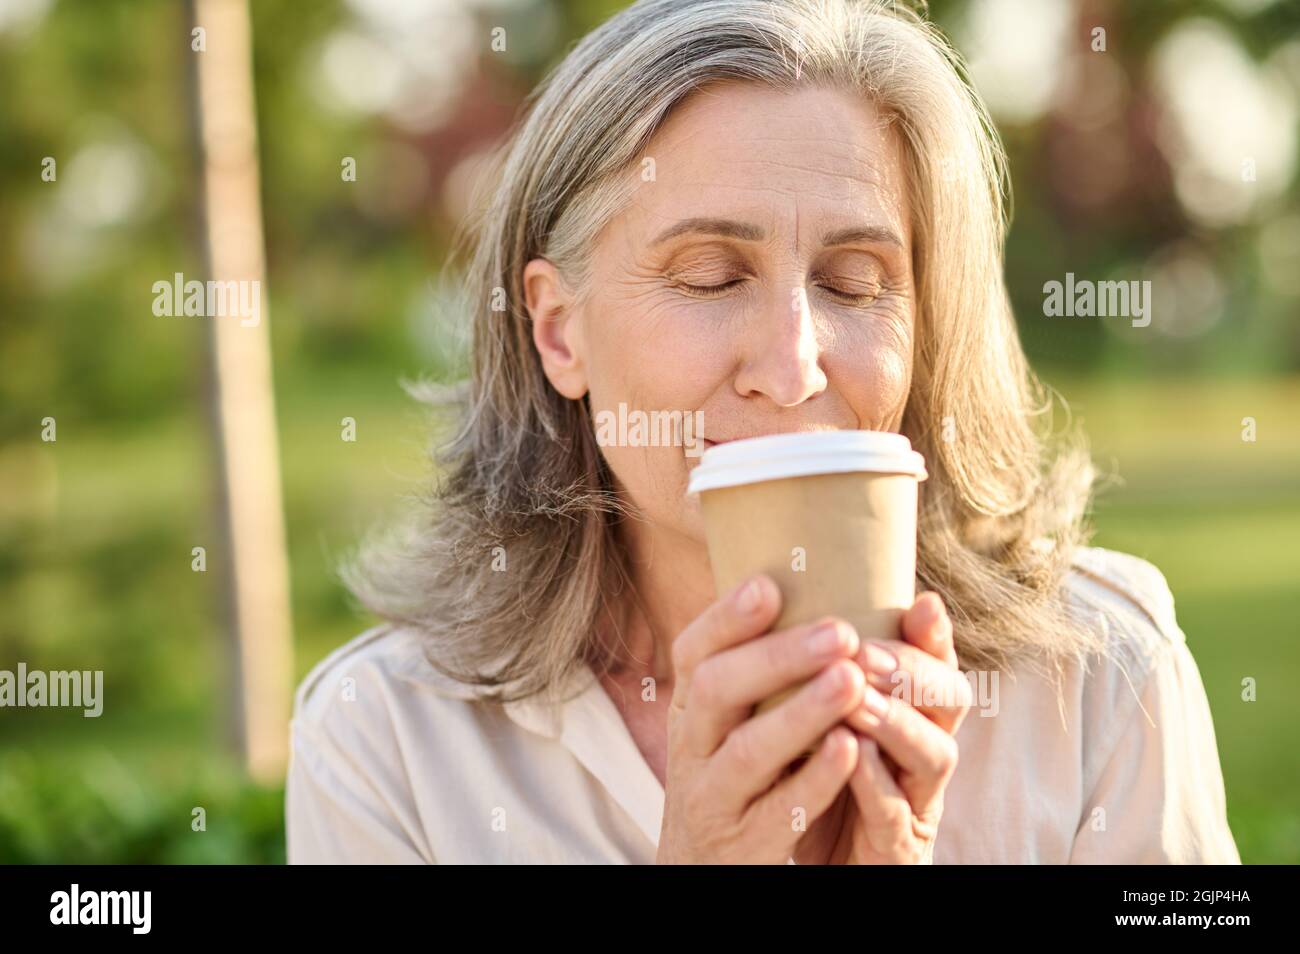 Woman with closed eyes holding glass of coffee Stock Photo